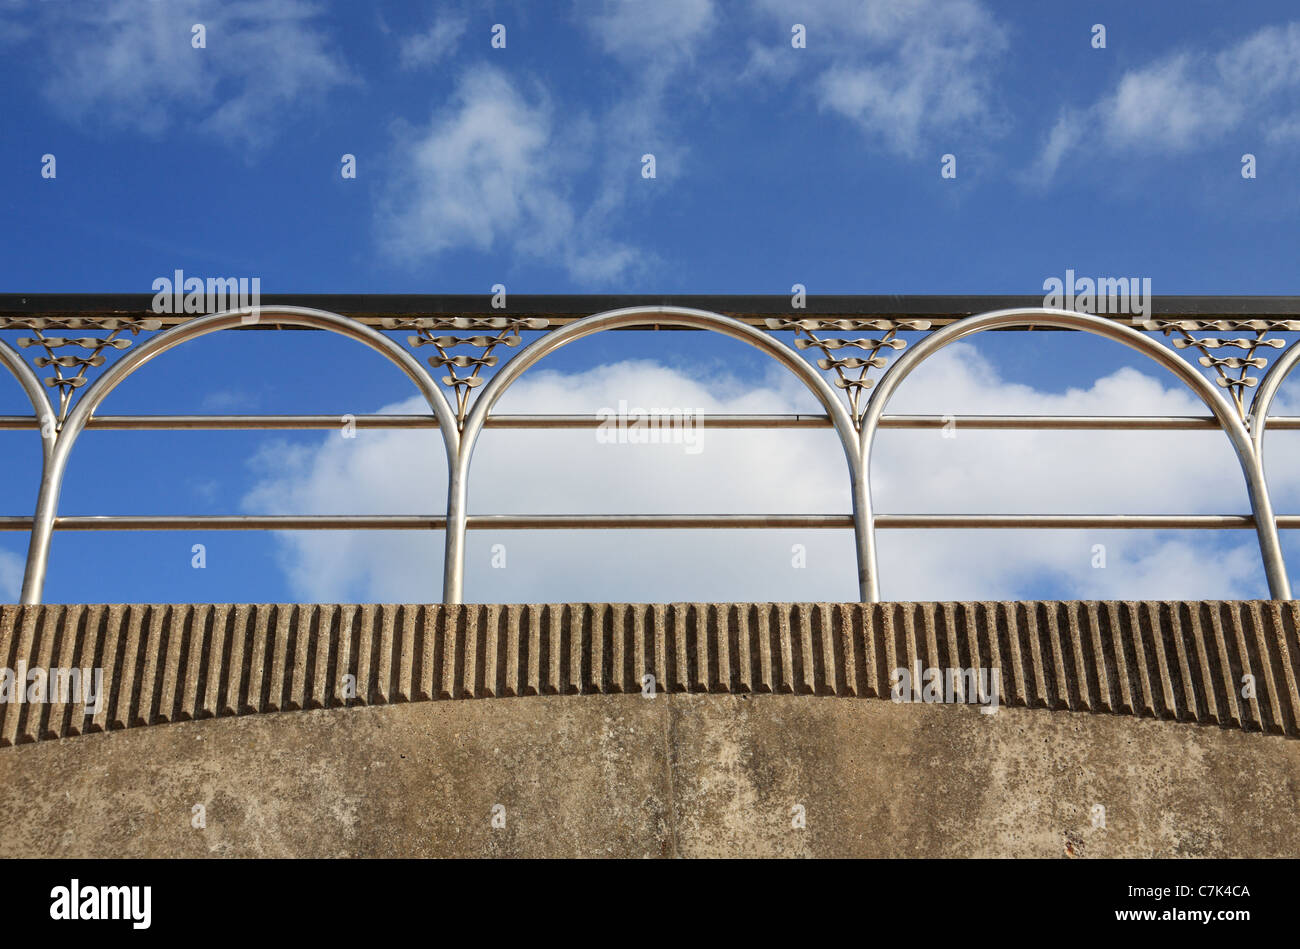 Blue sky above stainless steel railings, South Shields promenade, north east England, UK Stock Photo